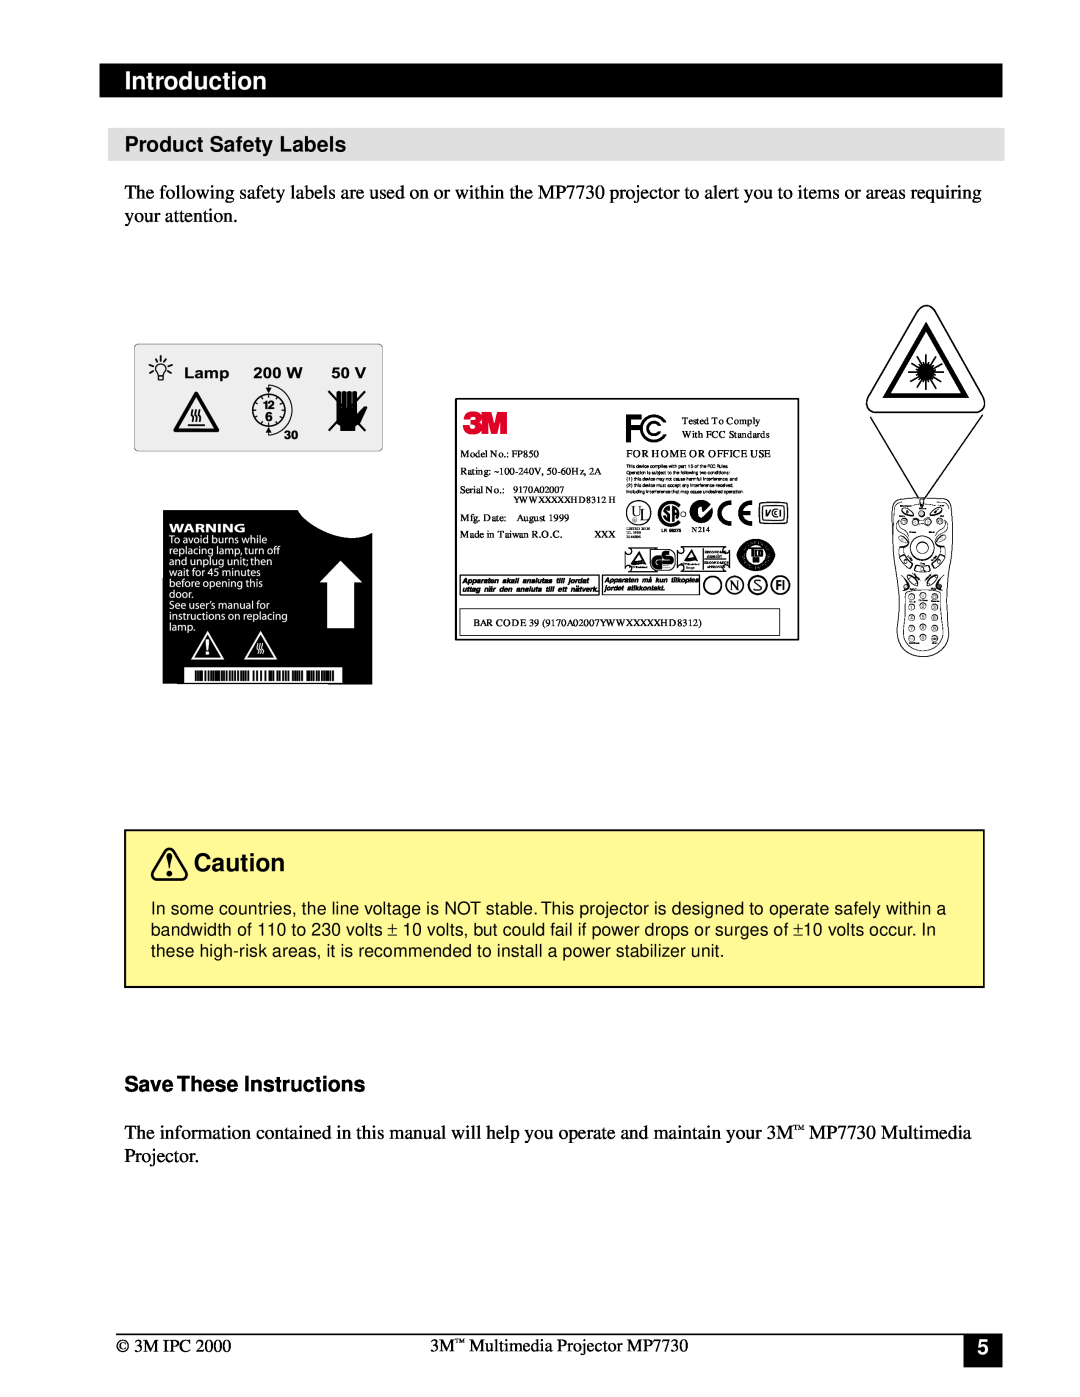 Apple MP7730 manual Product Safety Labels, Save These Instructions, Introduction, YWWXXXXXHD8312 H, Mfg. Date August 